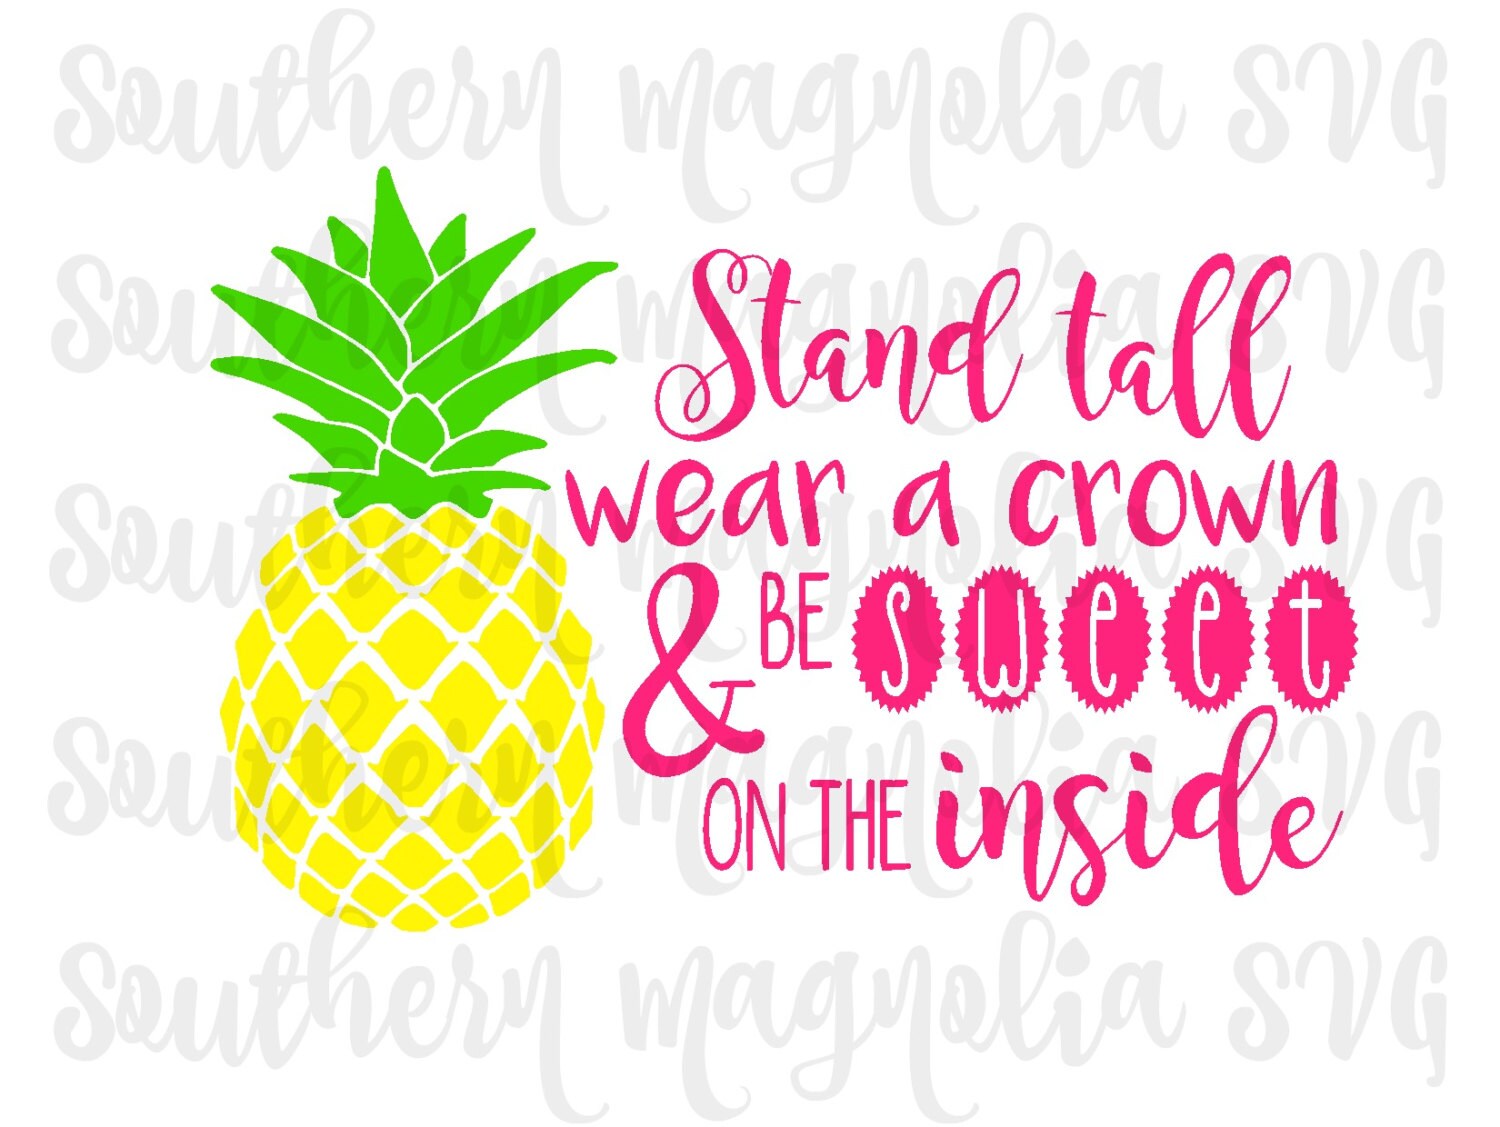 Be a Pineapple Stand Tall Wear a Crown Sweet on the Inside